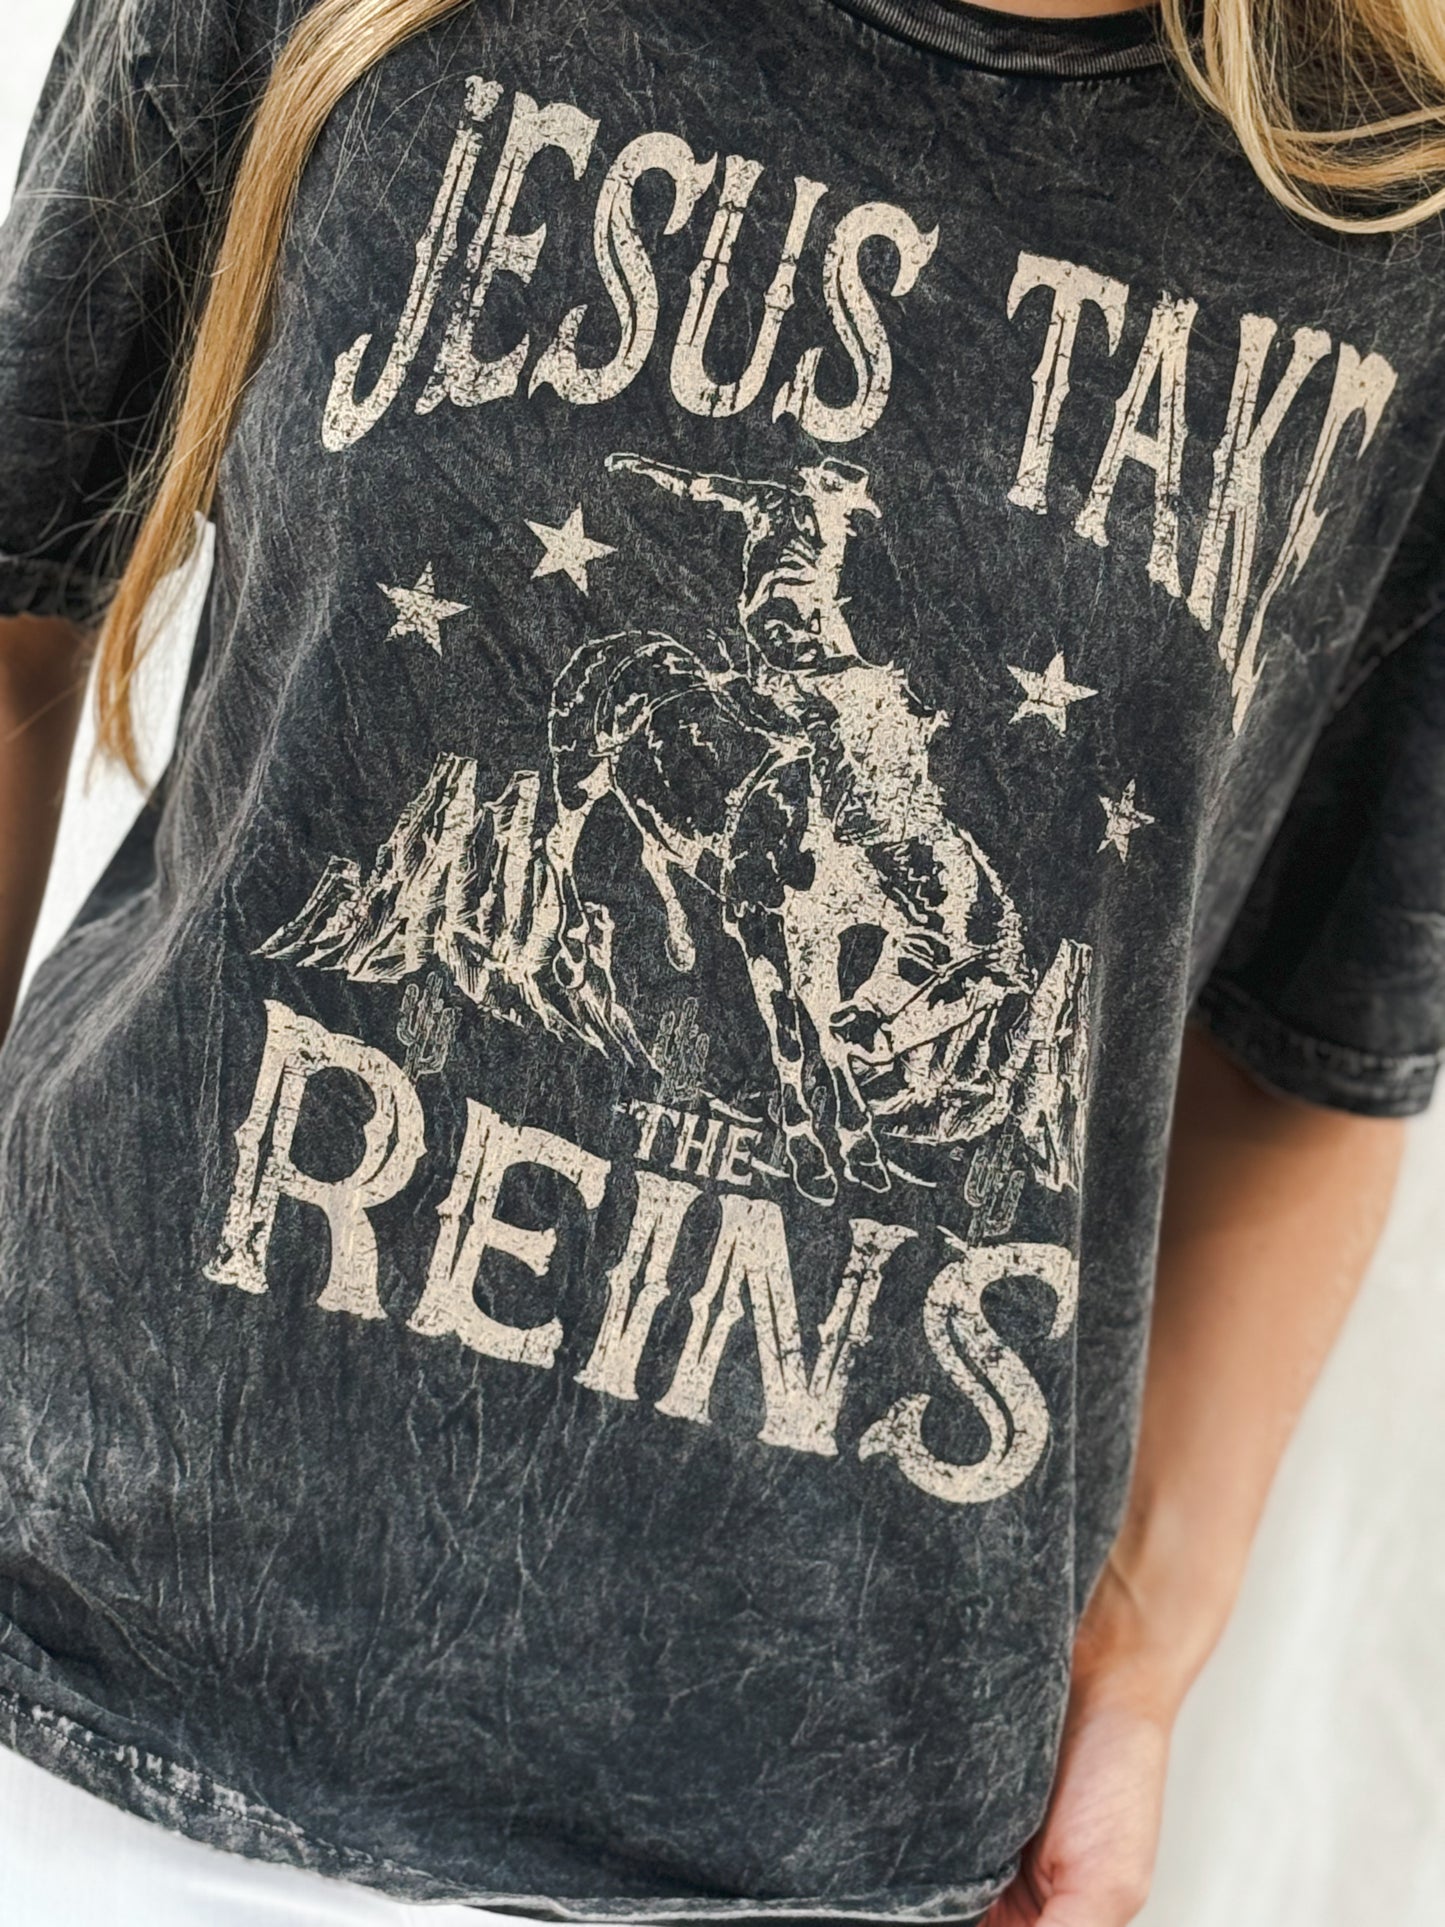 Take the Reigns Graphic Tee, Black